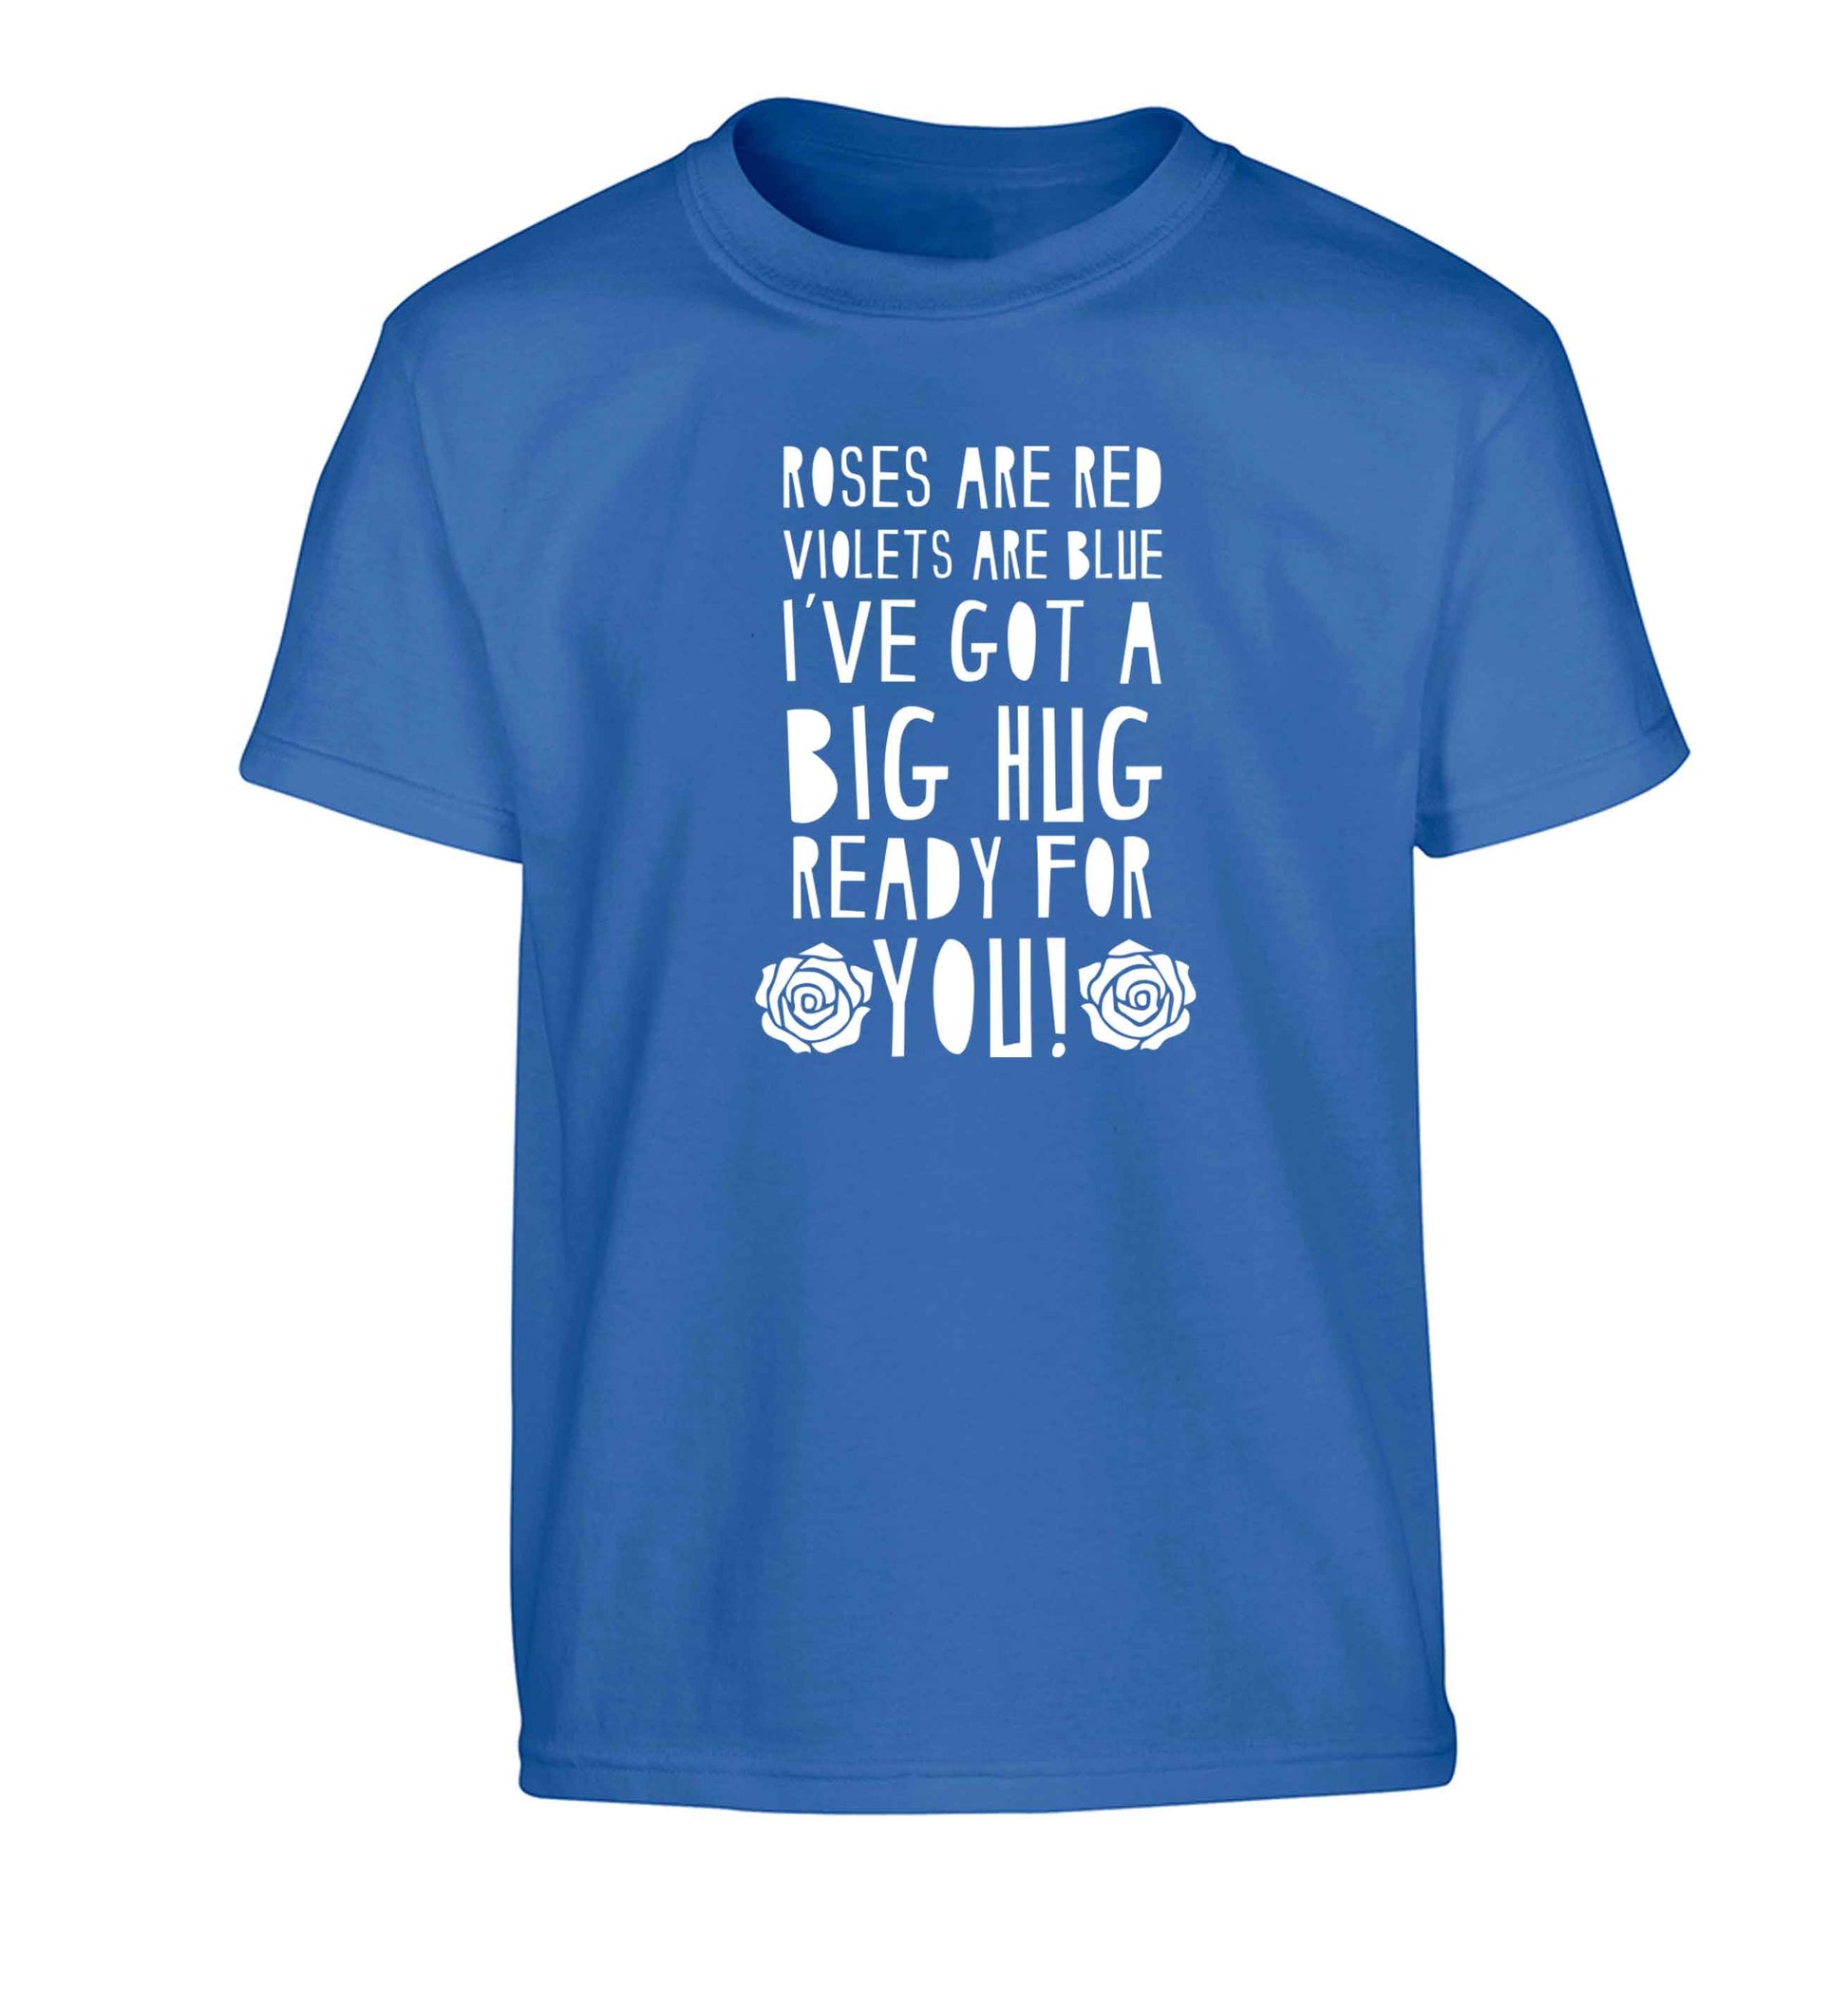 Roses are red violets are blue I've got a big hug coming for you Children's blue Tshirt 12-13 Years